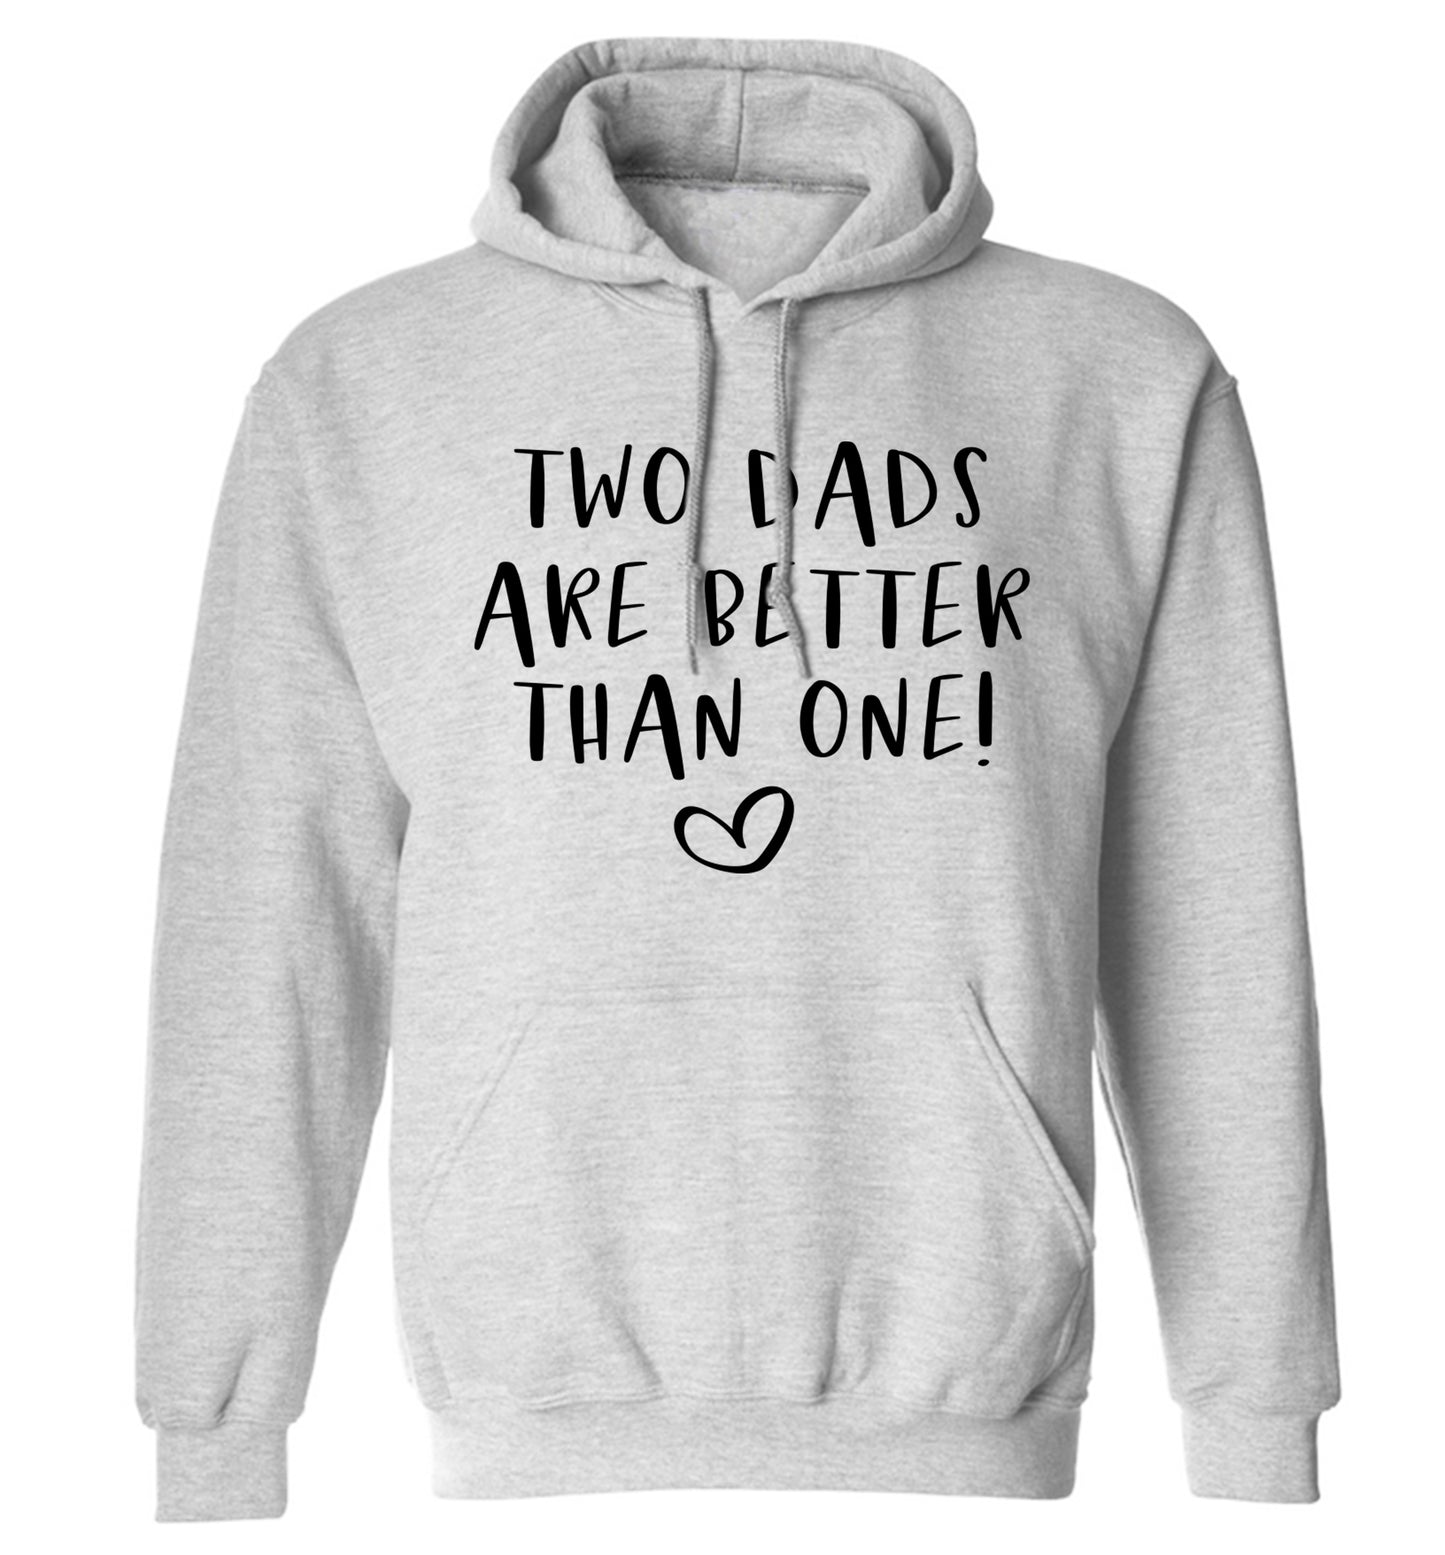 Two dads are better than one adults unisex grey hoodie 2XL